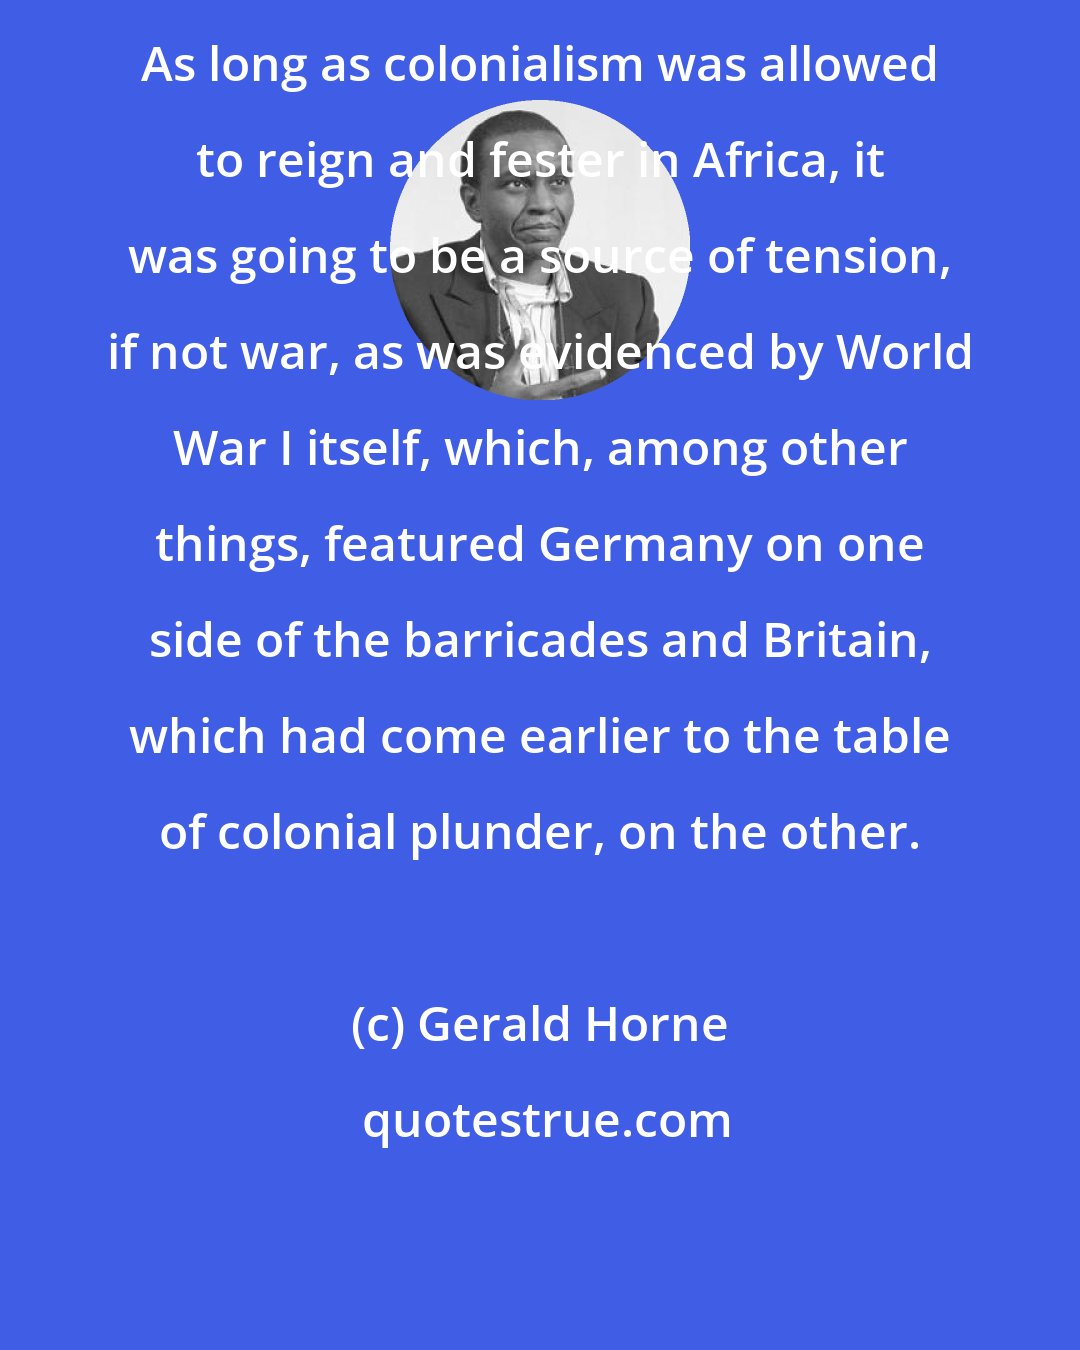 Gerald Horne: As long as colonialism was allowed to reign and fester in Africa, it was going to be a source of tension, if not war, as was evidenced by World War I itself, which, among other things, featured Germany on one side of the barricades and Britain, which had come earlier to the table of colonial plunder, on the other.